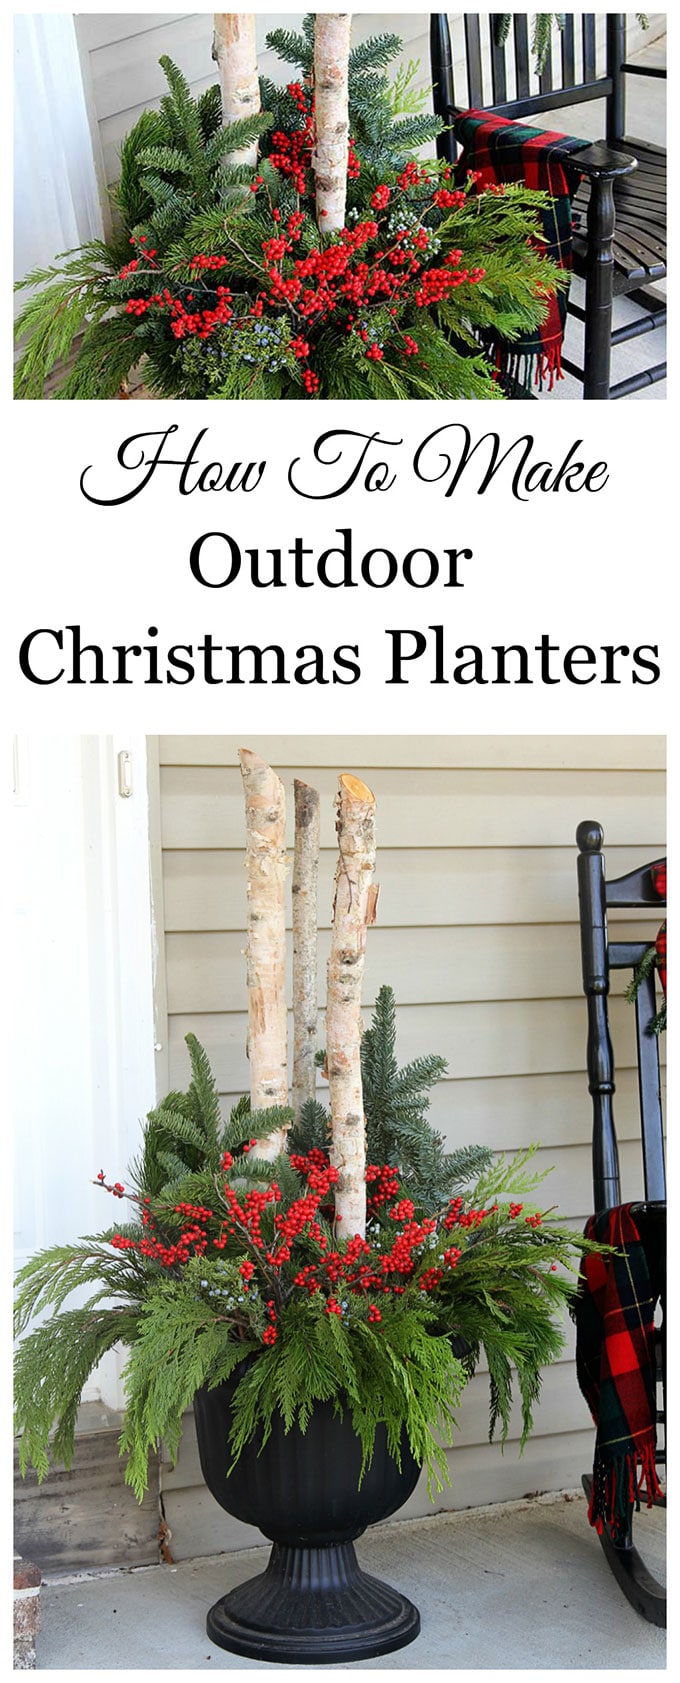 How To Make Outdoor Christmas Planters House Of Hawthornes